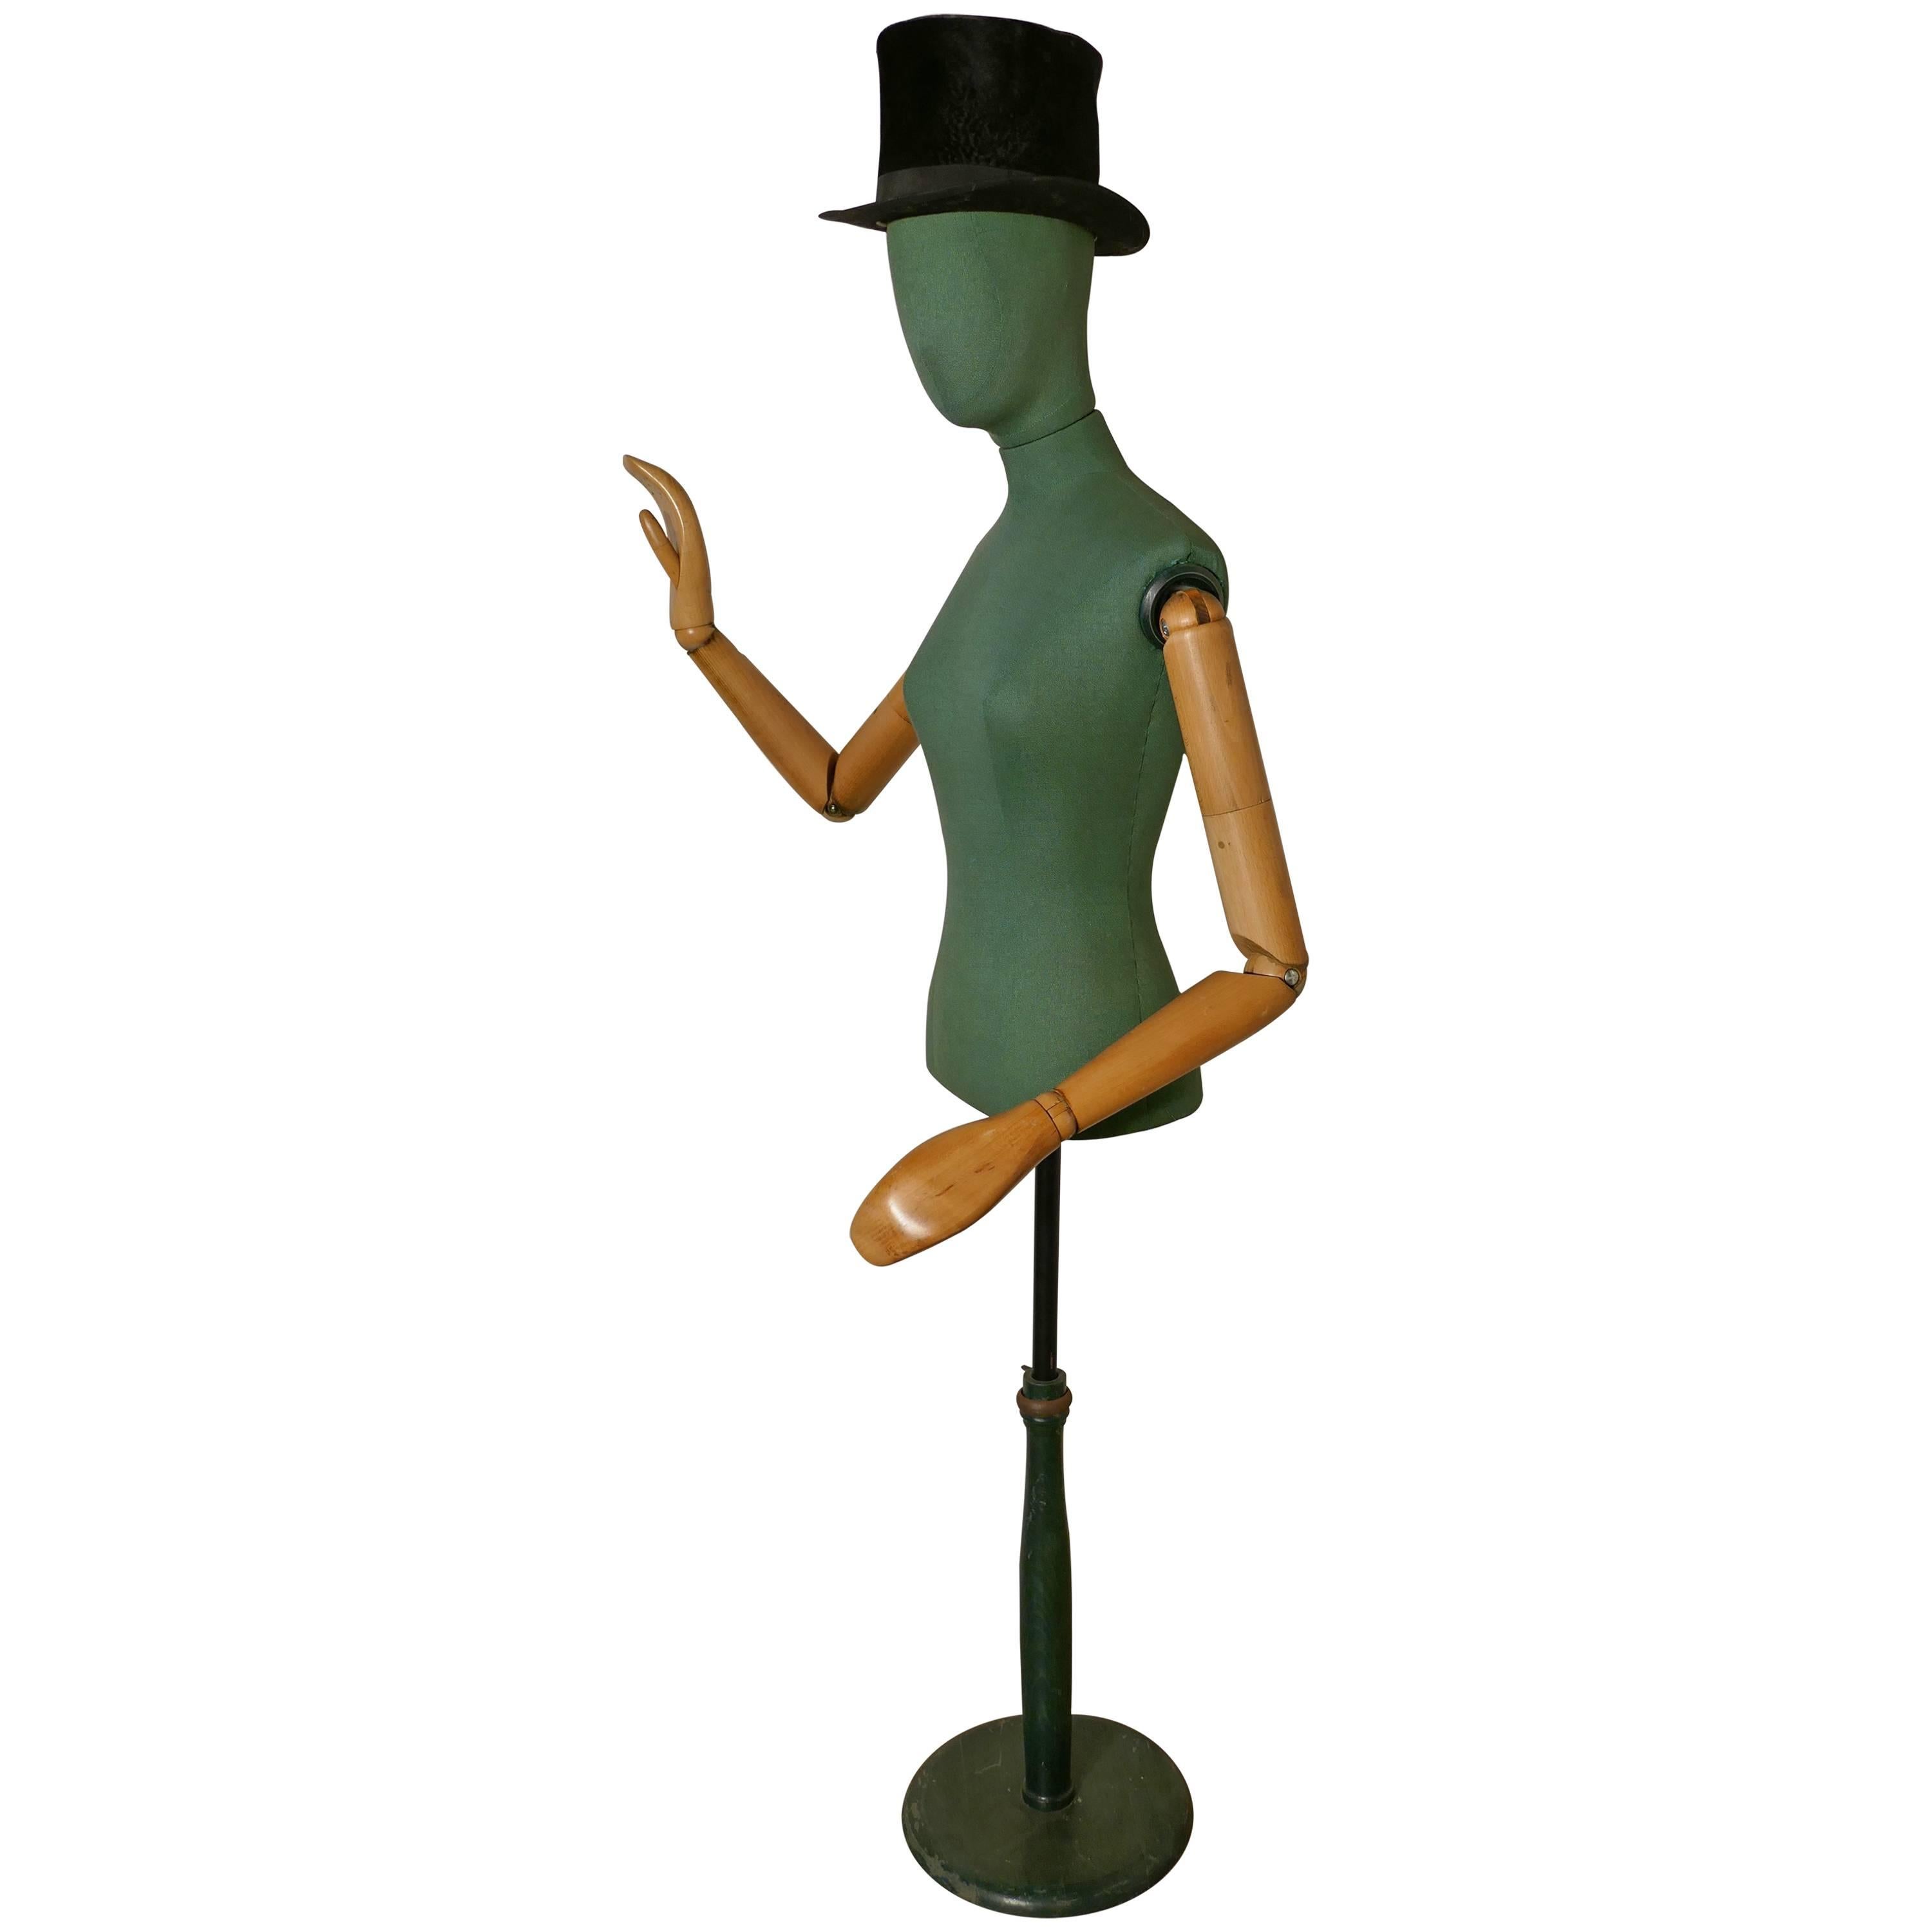 Quirky Green Vintage Mannequin by Stockman, Taylor’s Dummy